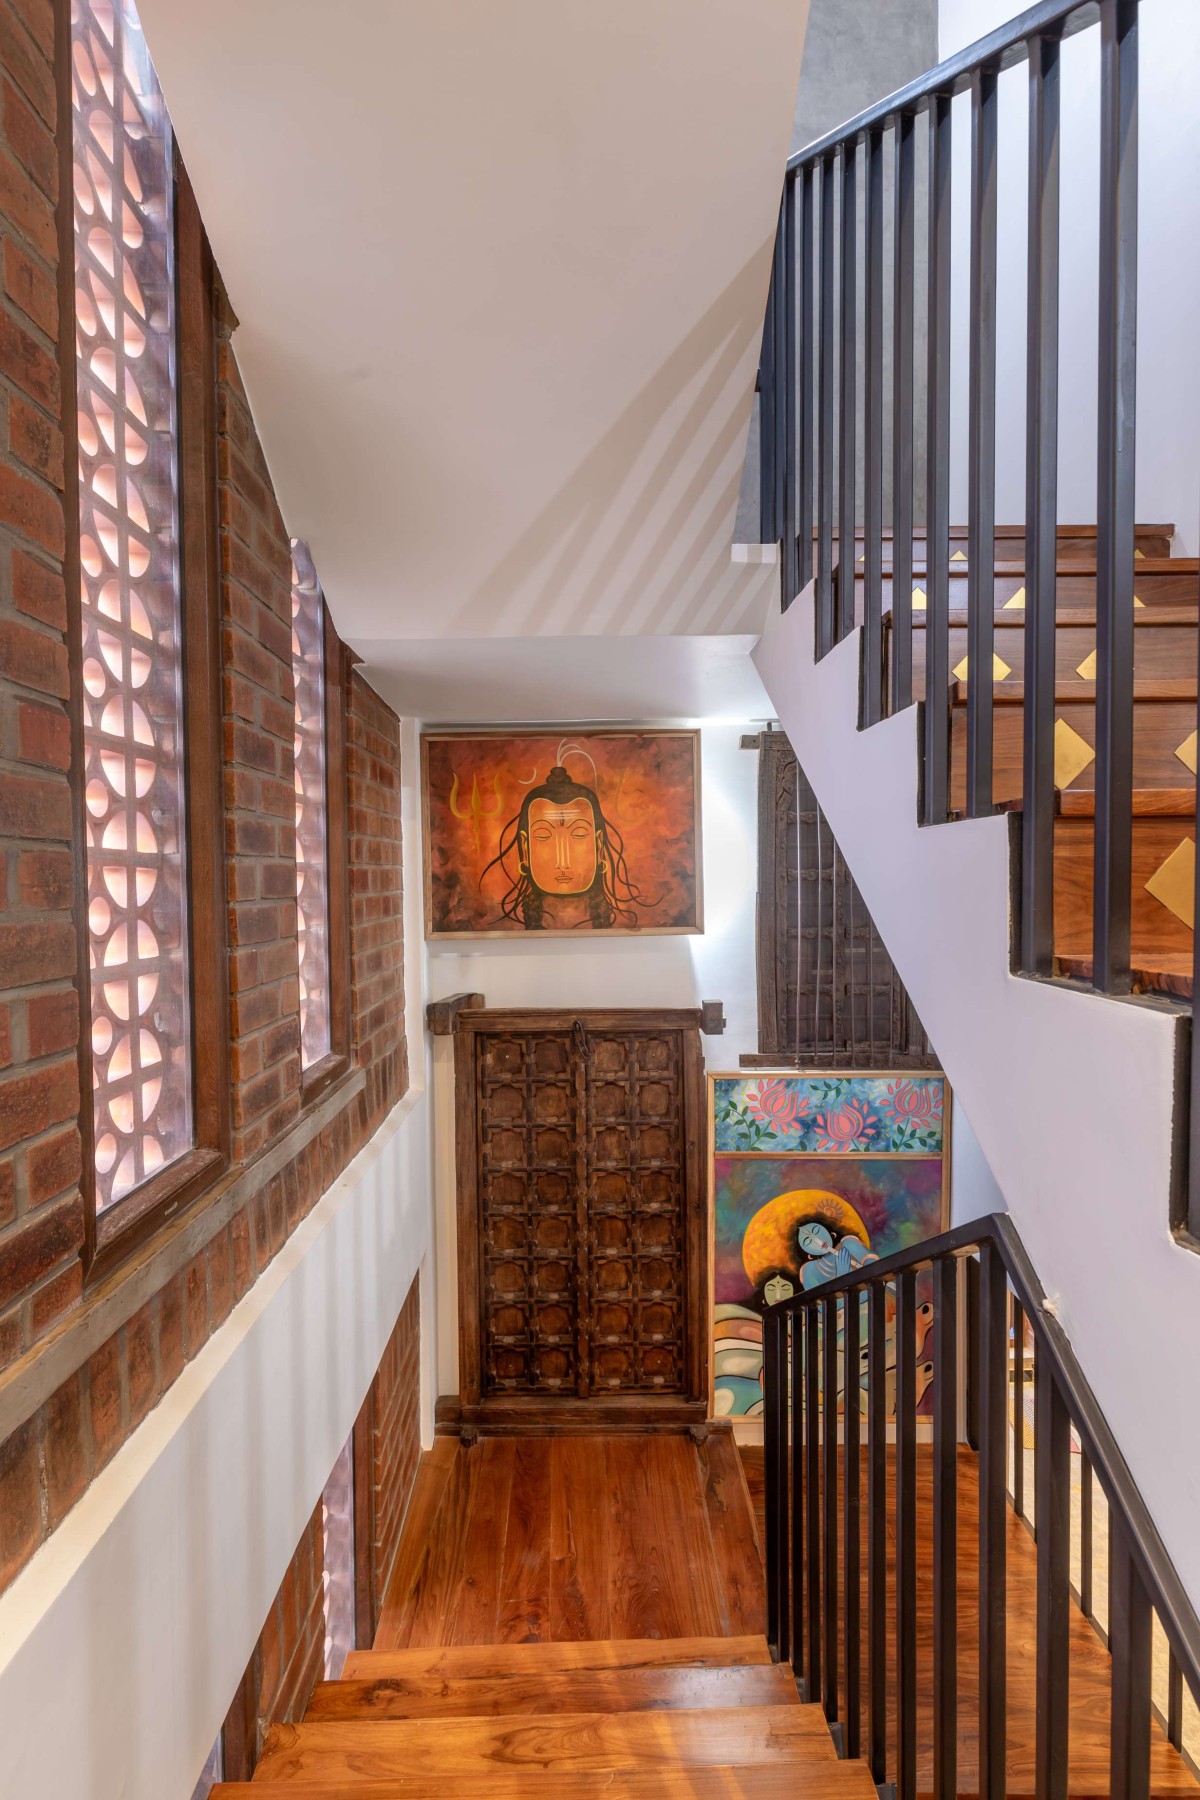 Paintings of Krishna, Shiva and antique doors sourced from Jodhpur bring in character to the staircase wall – Kuteeram by Brick and Compass